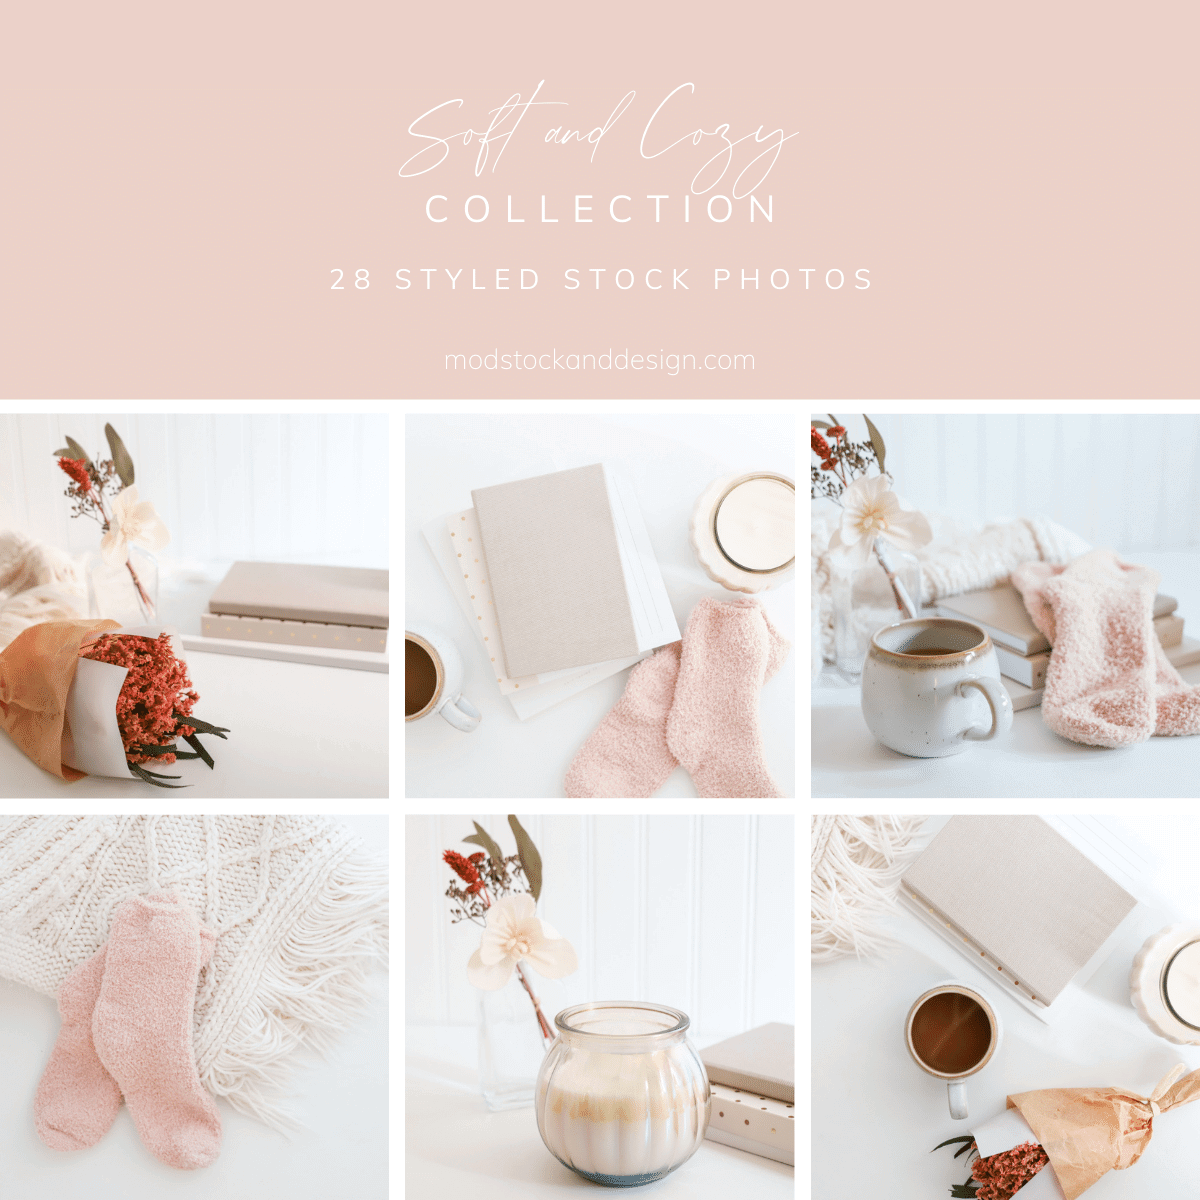 Soft and Cozy Preview